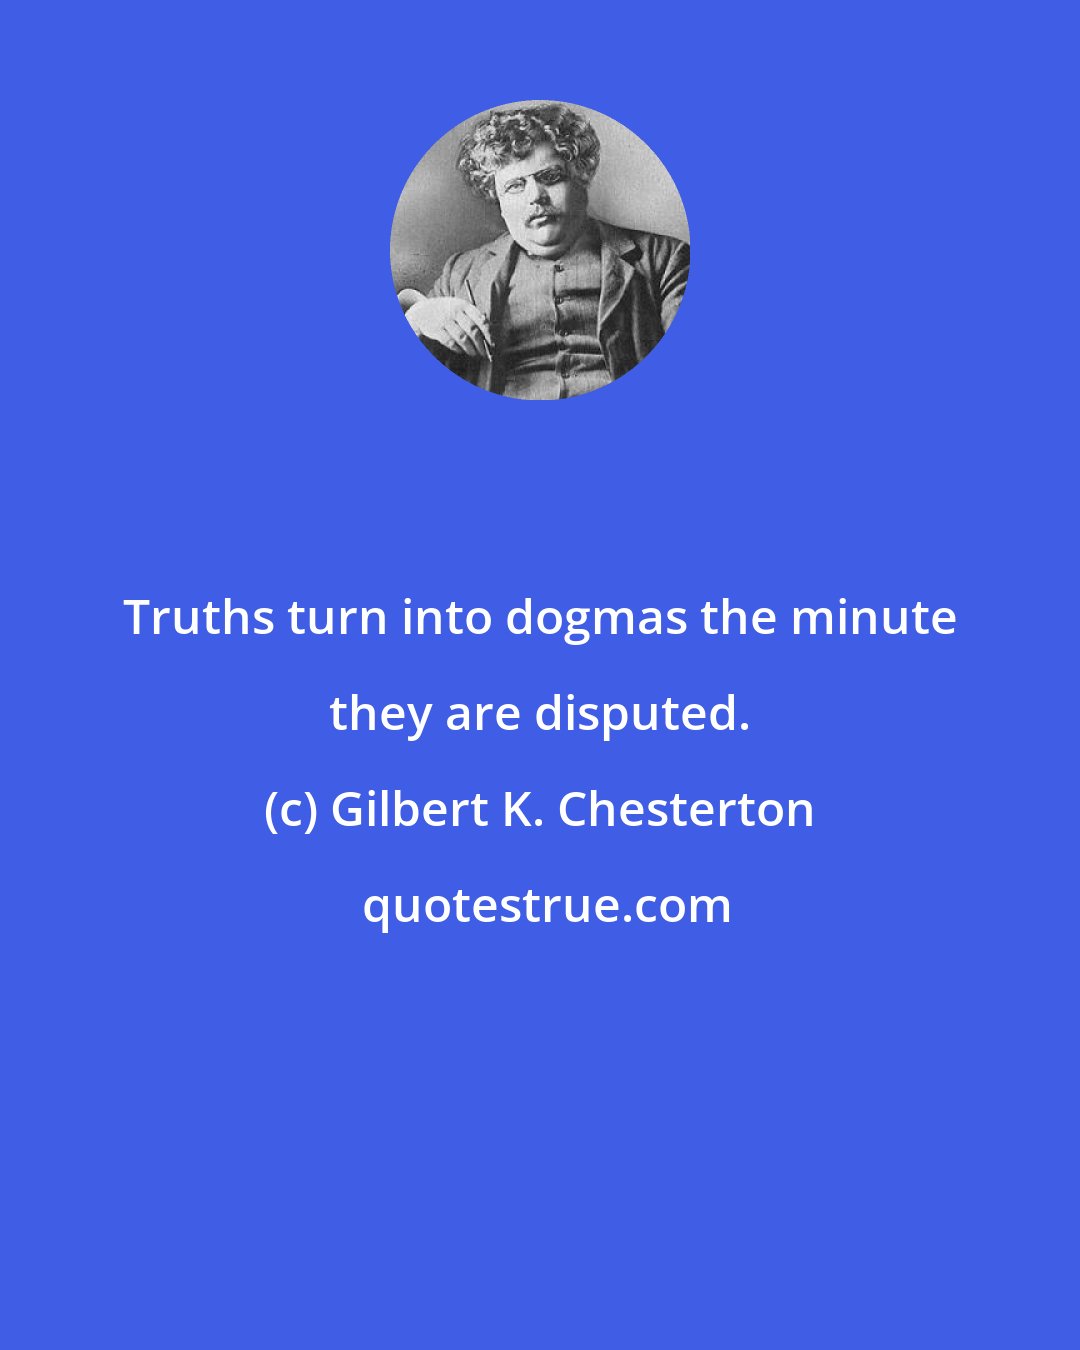 Gilbert K. Chesterton: Truths turn into dogmas the minute they are disputed.